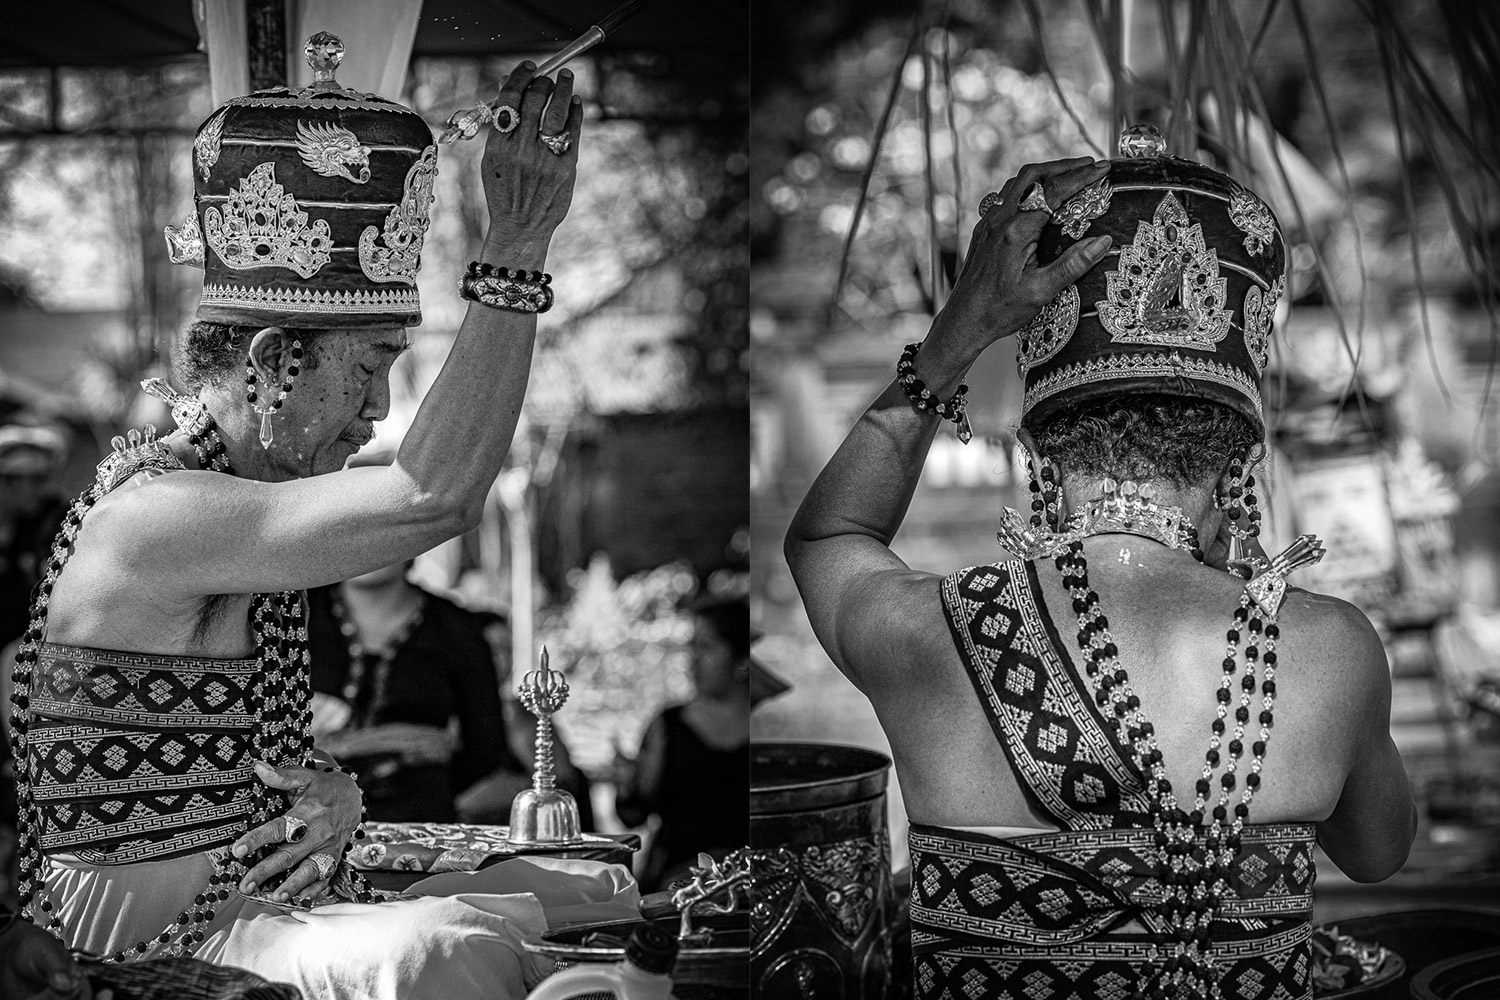 Ngaben cremation in Bali, the high priest Pedanda performs a series of mudras, or hand gestures using his bell and other paraphernalia such as a brazier.